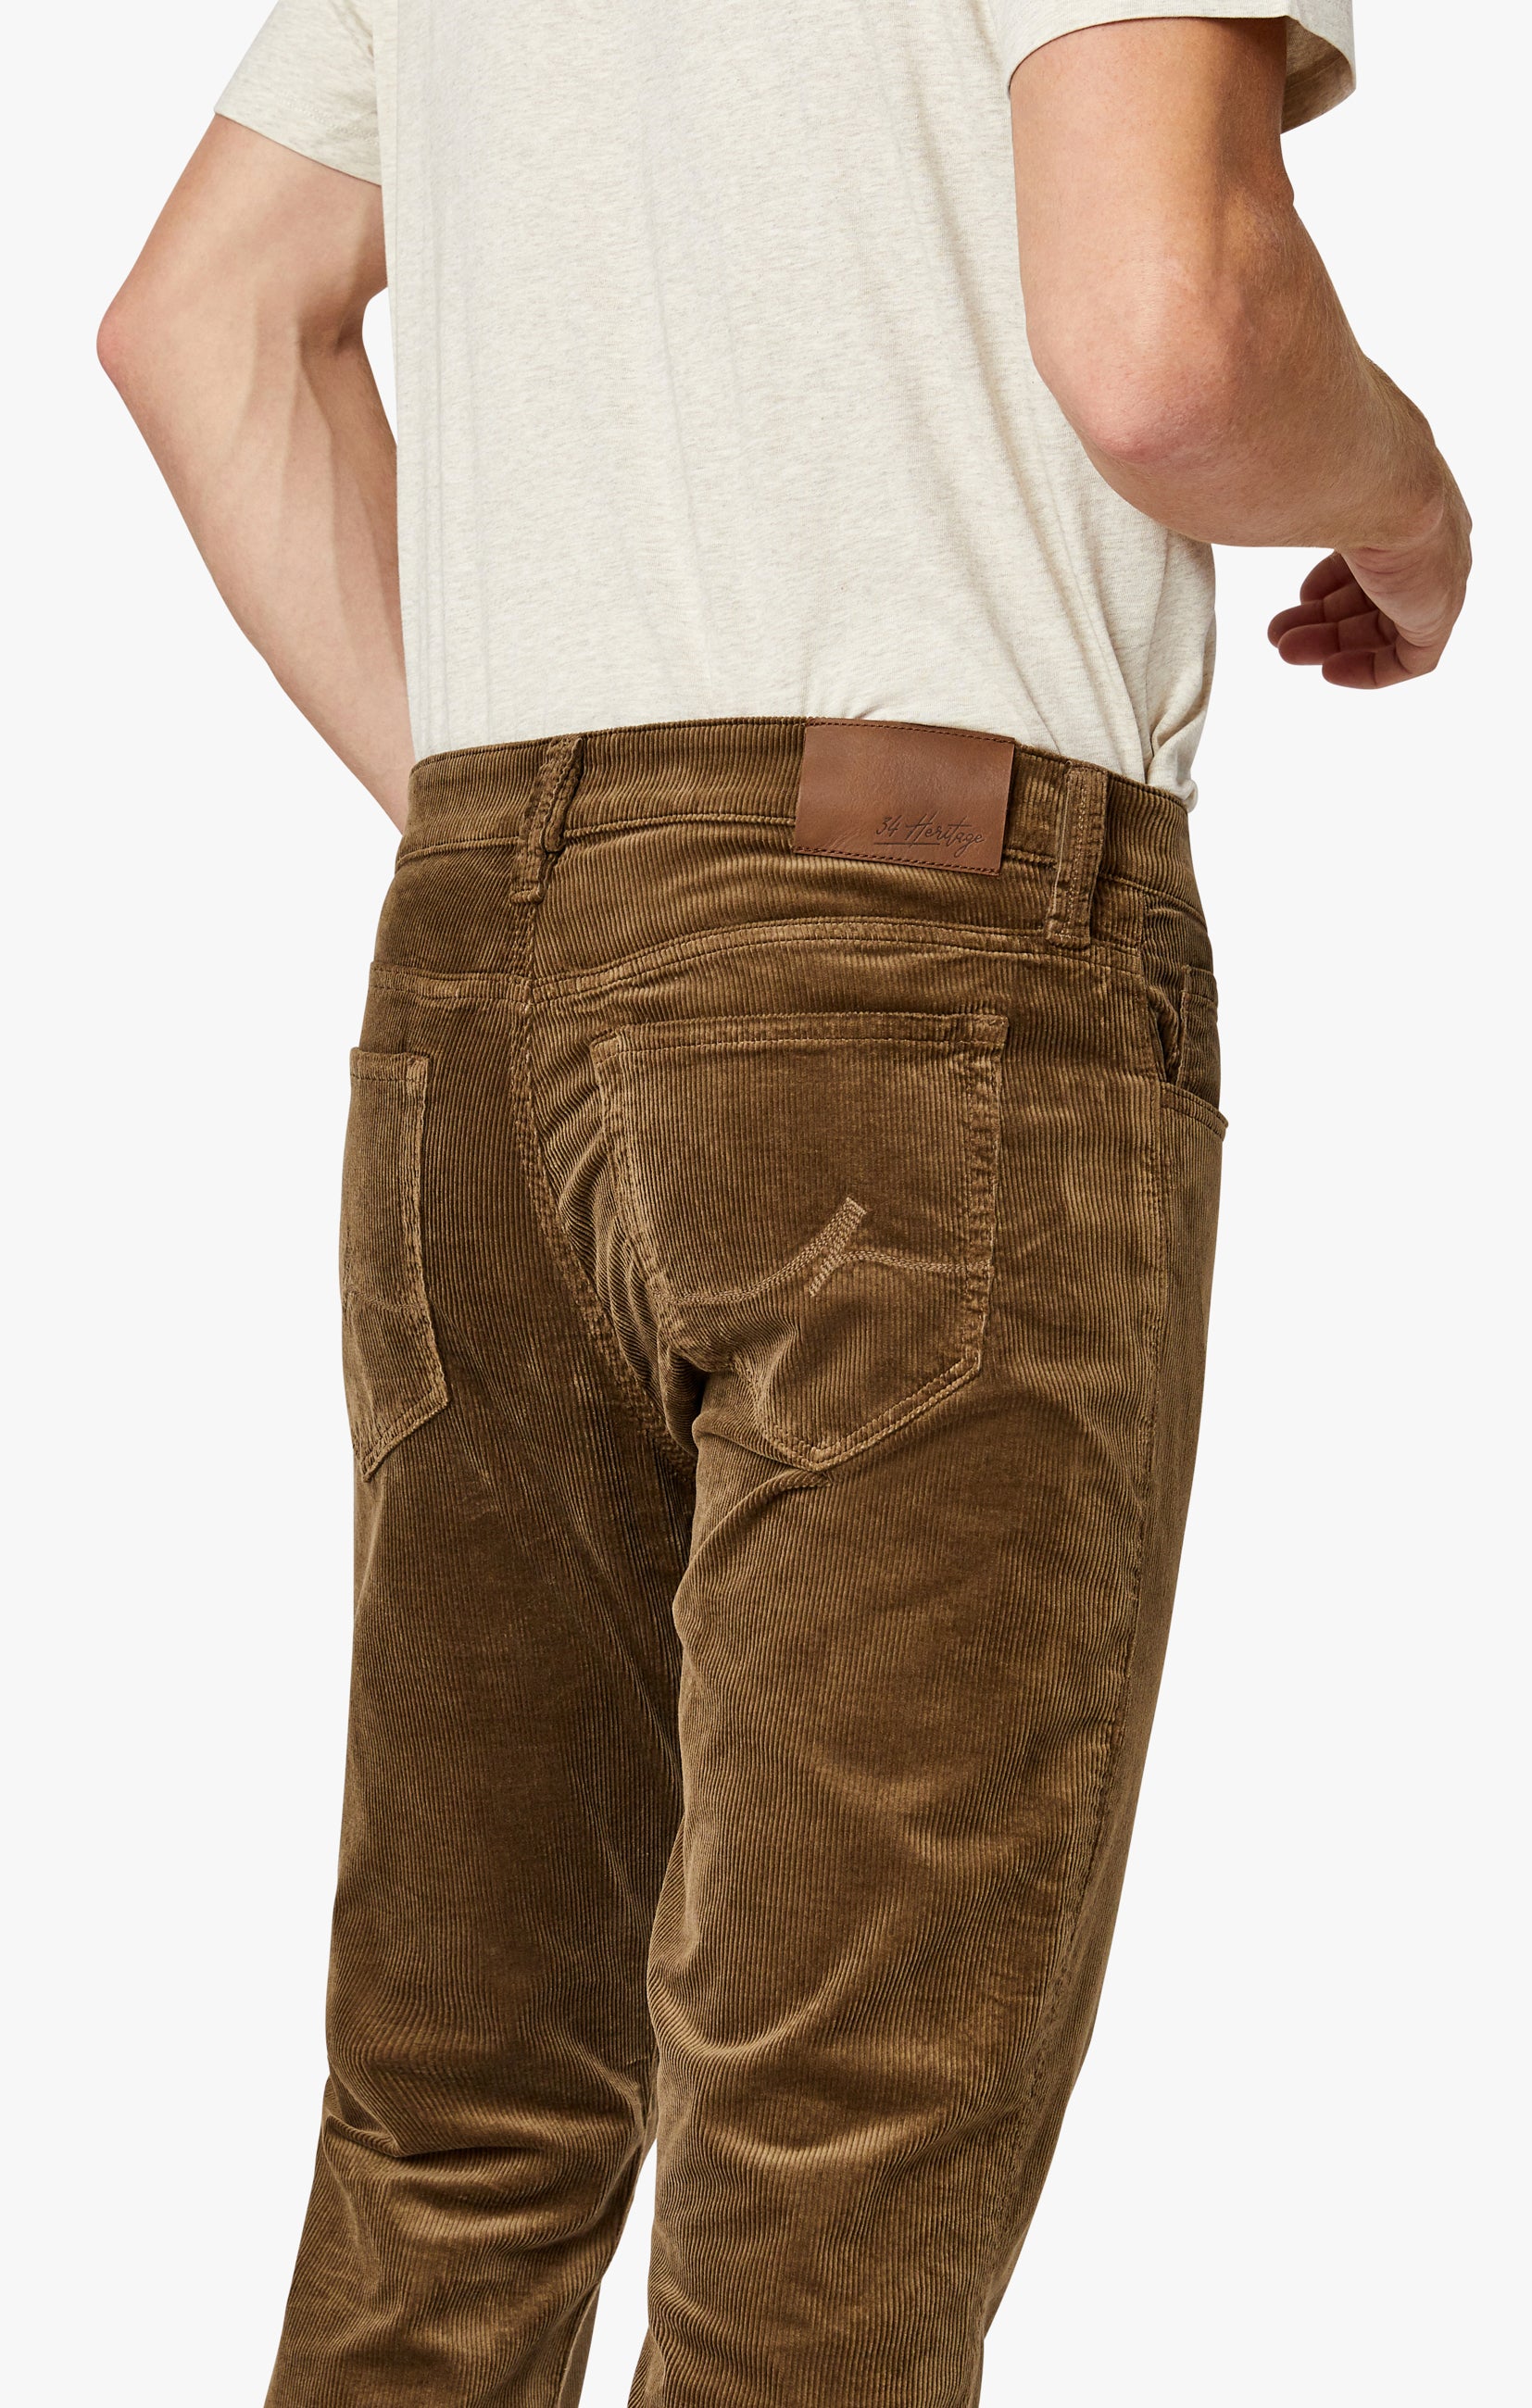 Charisma Relaxed Straight Pants in Tobacco Cord Image 7